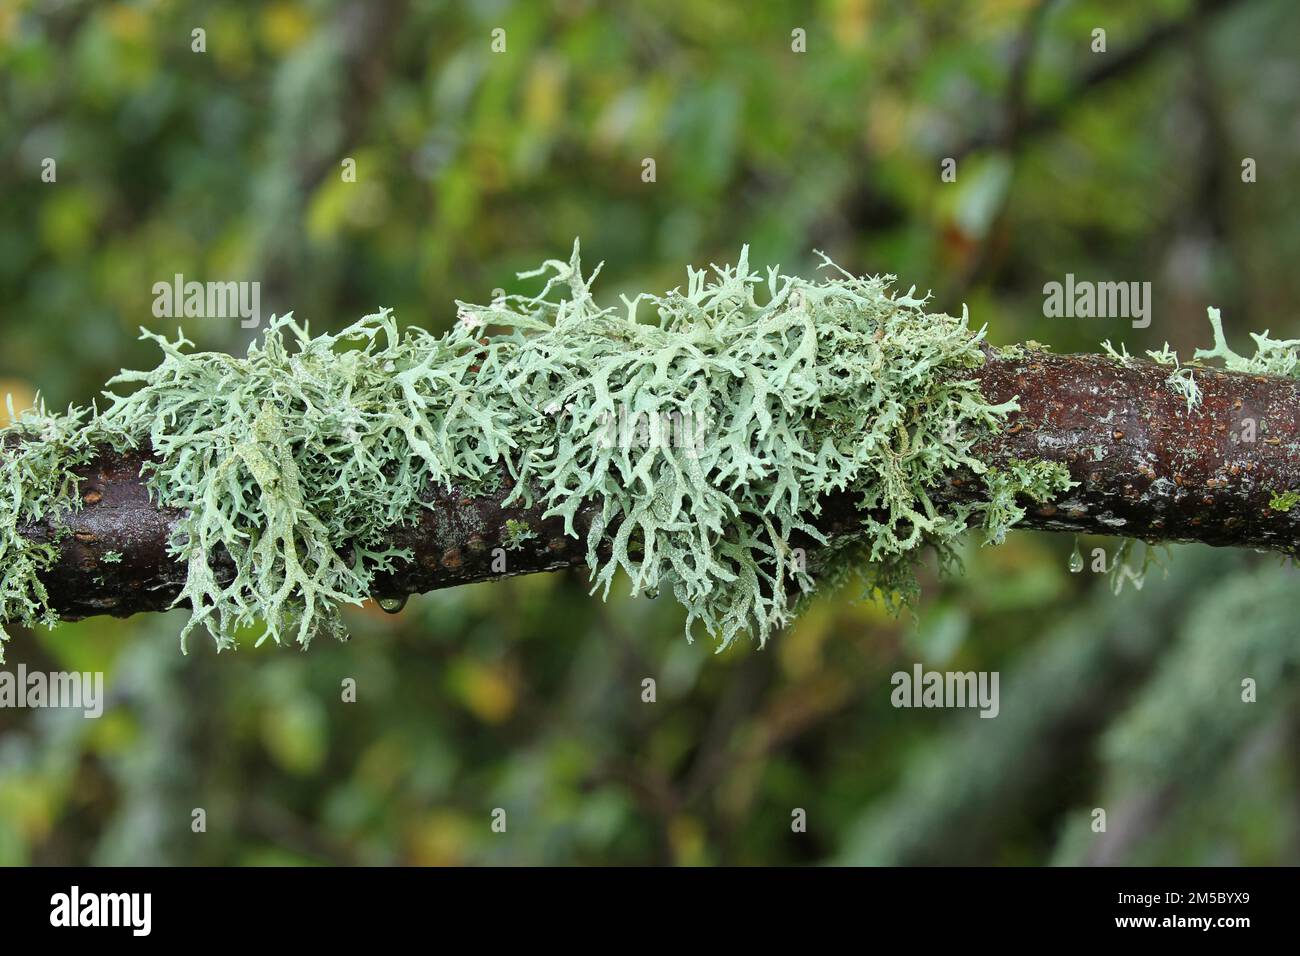 Iceland moss (Cetraria islandica) growing on a branch, southern Sweden, Scandinavia Stock Photo